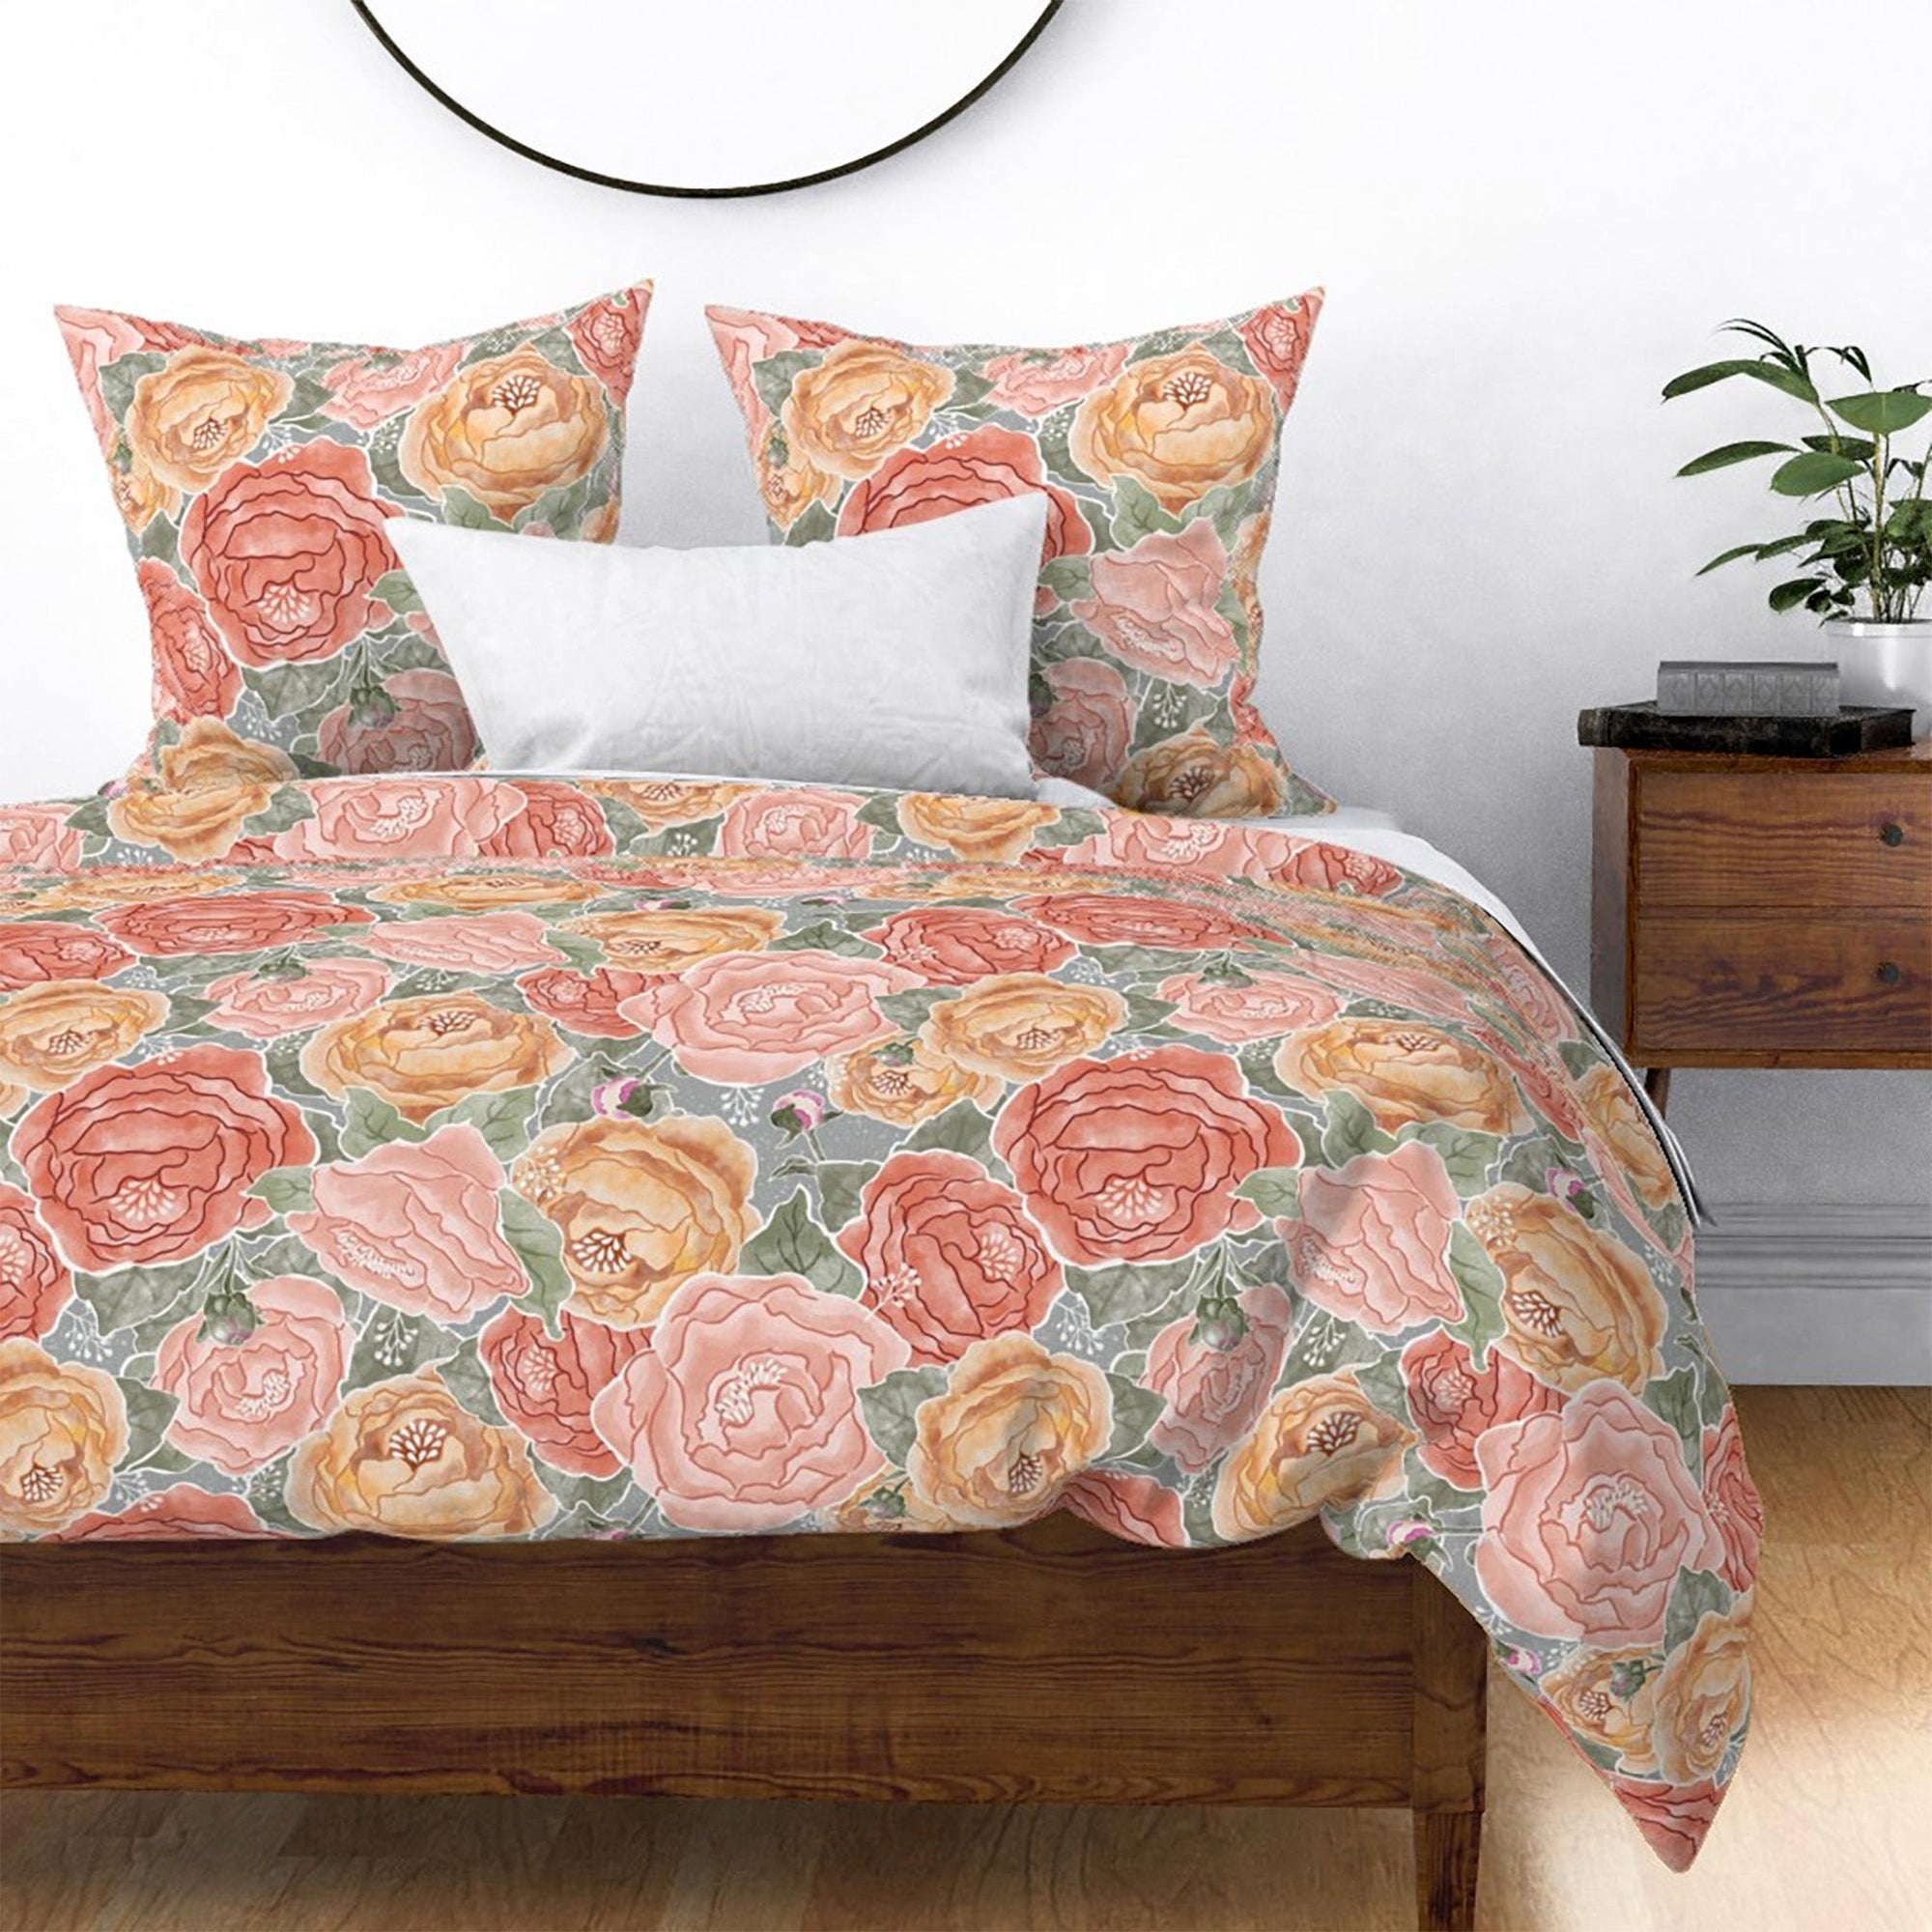 Pretty in Peony Bedding Collection with Gray Background duvet cover and shams